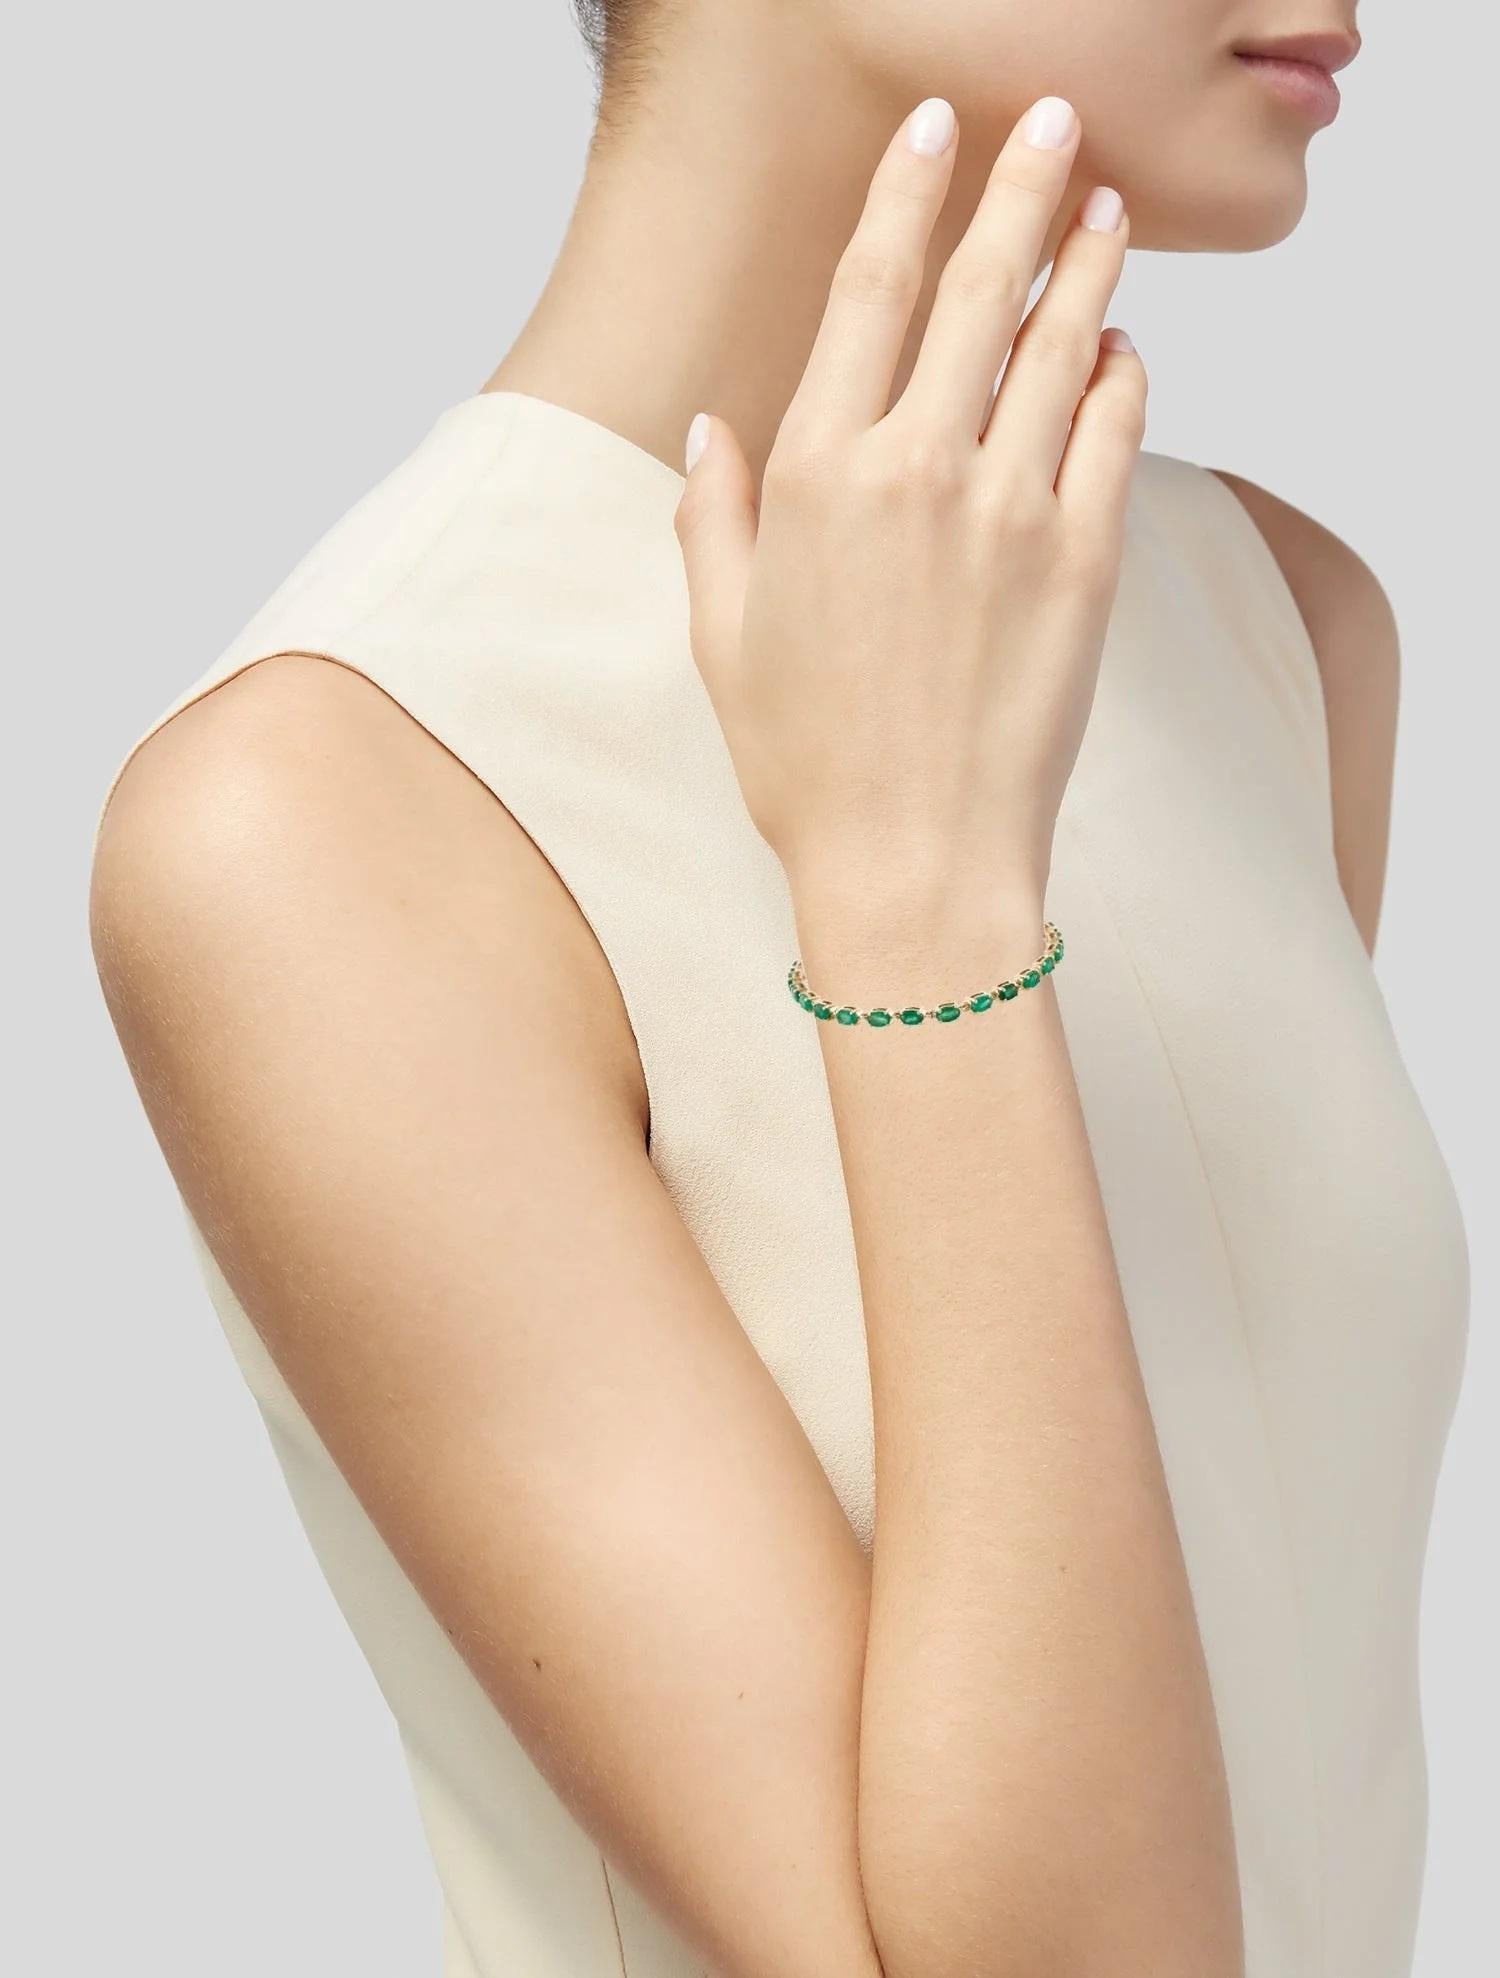 Elevate your jewelry collection with this exquisite 14K yellow gold link bracelet featuring a stunning 5.35 carat emerald. Crafted with meticulous attention to detail, this bracelet exudes timeless elegance and sophistication.

Specifications:

*